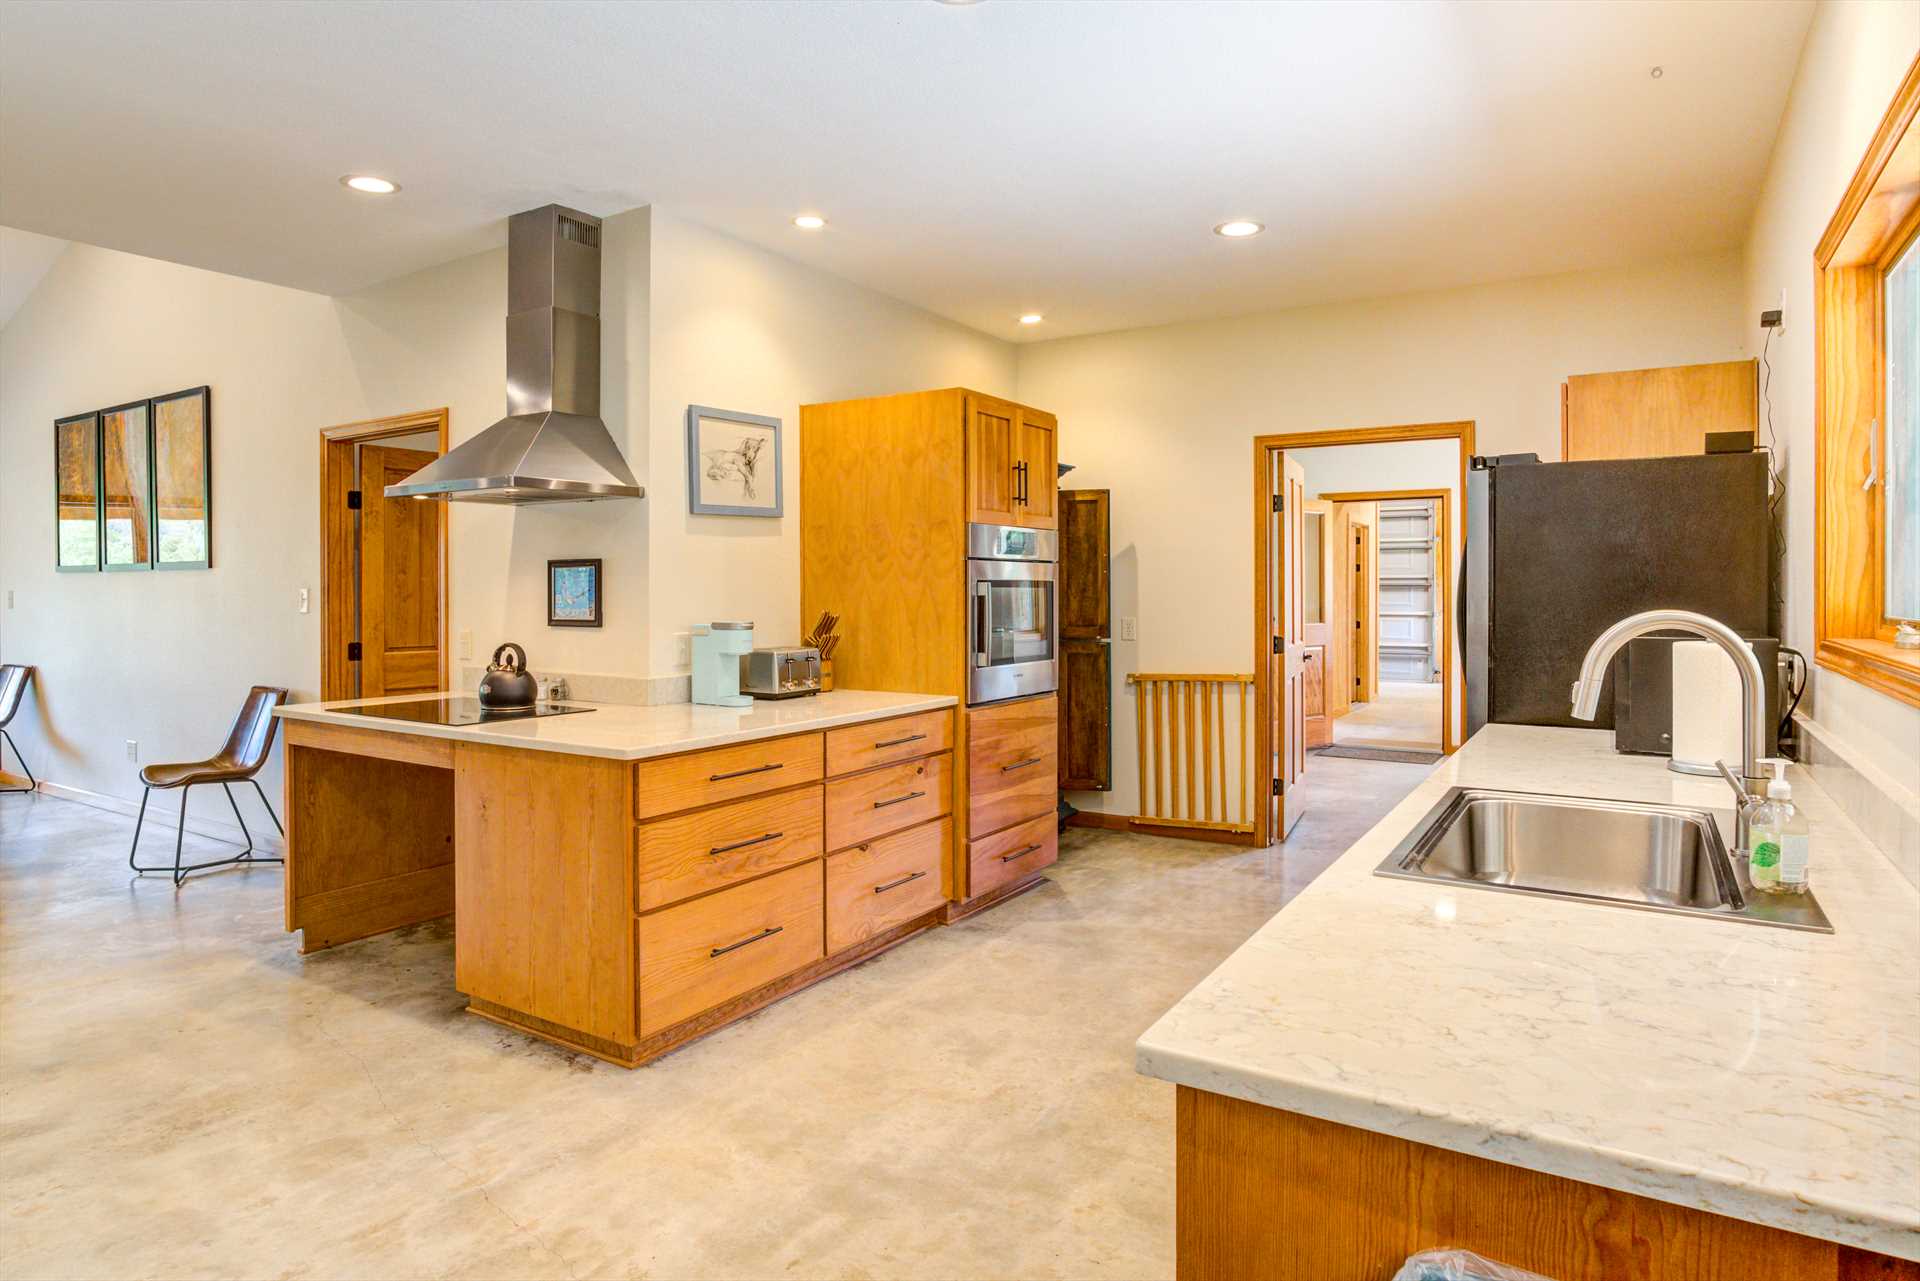                                                 Tons of counter space, modern appliances, cooking and dining ware, utensils, and glasses...the ranch's enormous kitchen has it all!